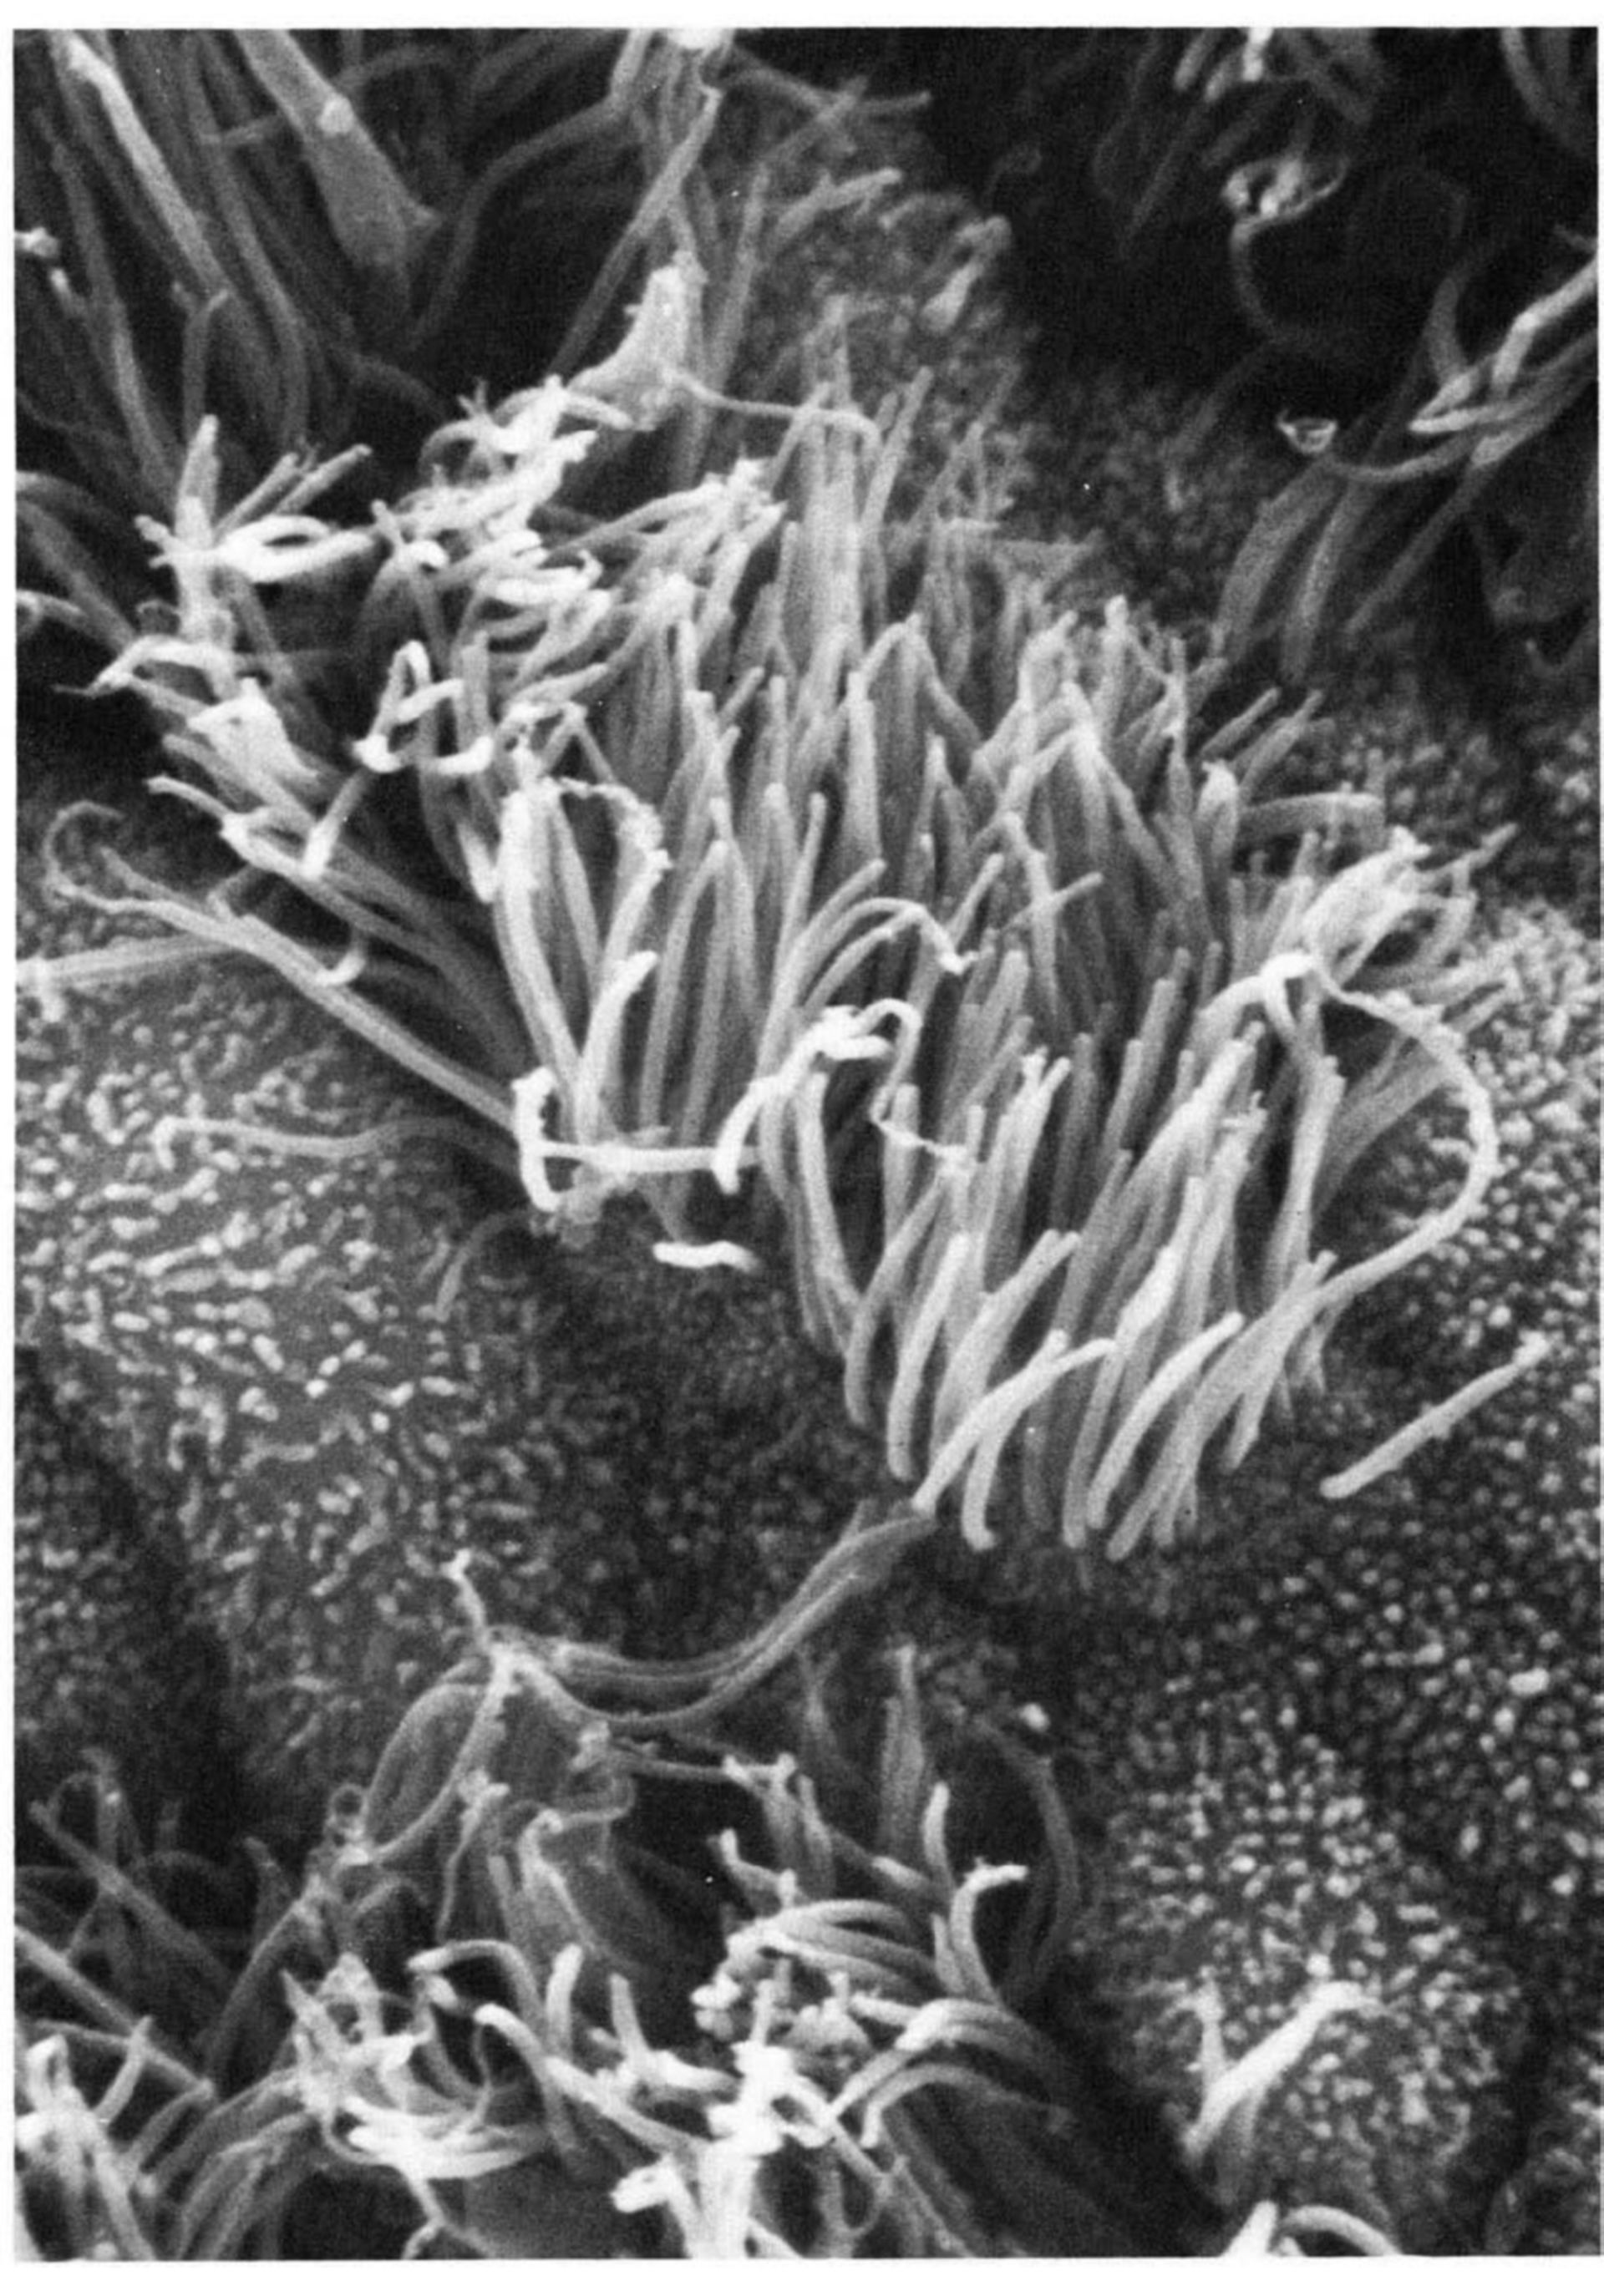 Cilia! Image of the Week – March 18, 2019 - CIL:11620 - http://www.cellimagelibrary.org/images/11620